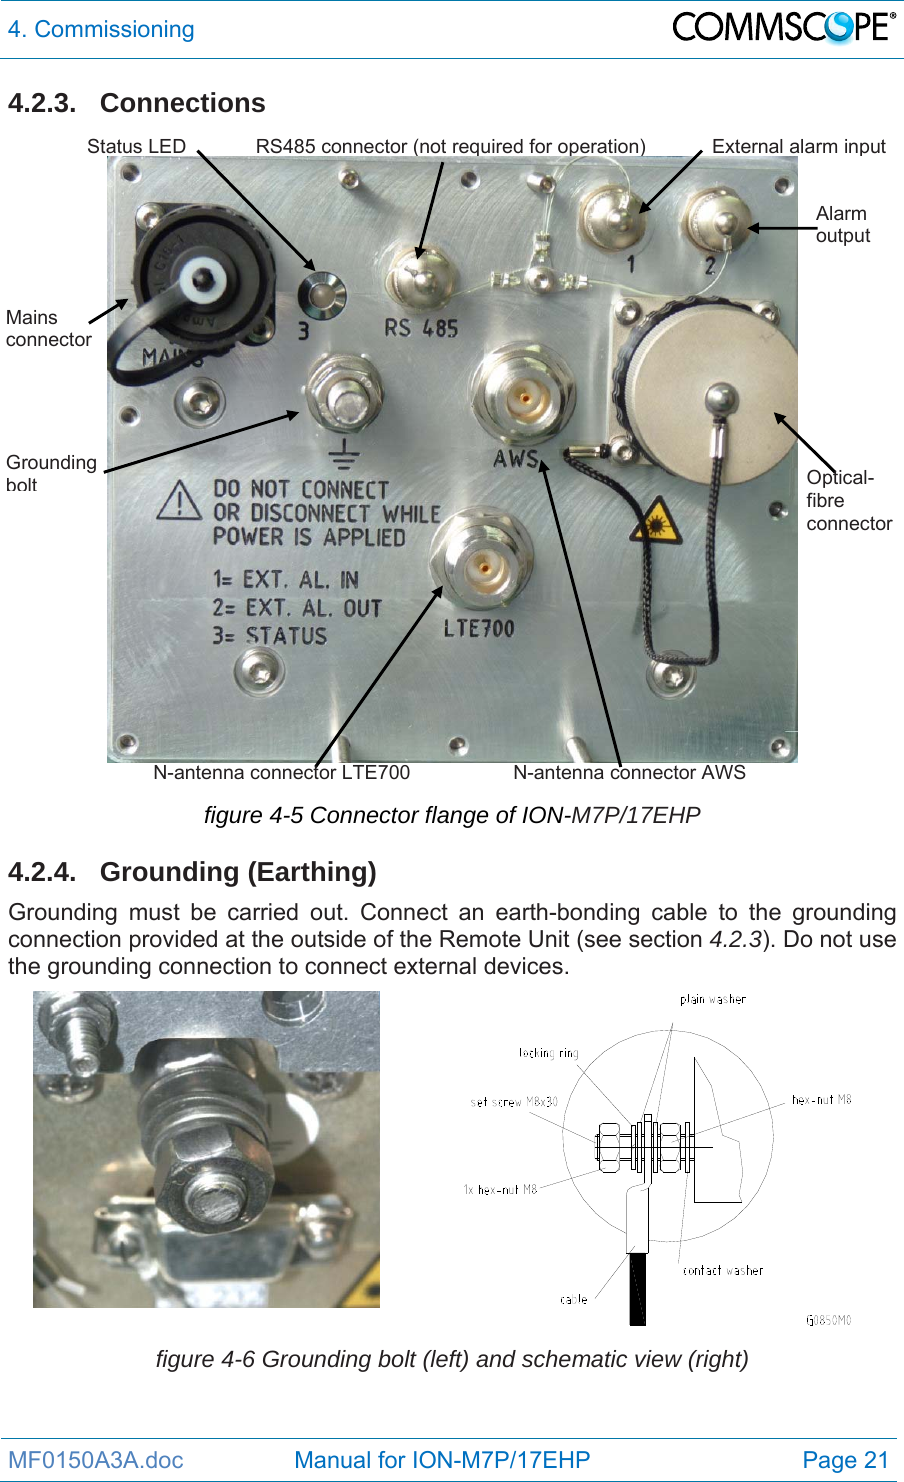 4. Commissioning  MF0150A3A.doc                 Manual for ION-M7P/17EHP  Page 21 4.2.3. Connections    figure 4-5 Connector flange of ION-M7P/17EHP  4.2.4. Grounding (Earthing)  Grounding must be carried out. Connect an earth-bonding cable to the grounding connection provided at the outside of the Remote Unit (see section 4.2.3). Do not use the grounding connection to connect external devices.   figure 4-6 Grounding bolt (left) and schematic view (right) Grounding boltN-antenna connector LTE700 Mains connector Status LED  External alarm inputAlarm  output Optical-fibre connector RS485 connector (not required for operation)N-antenna connector AWS 